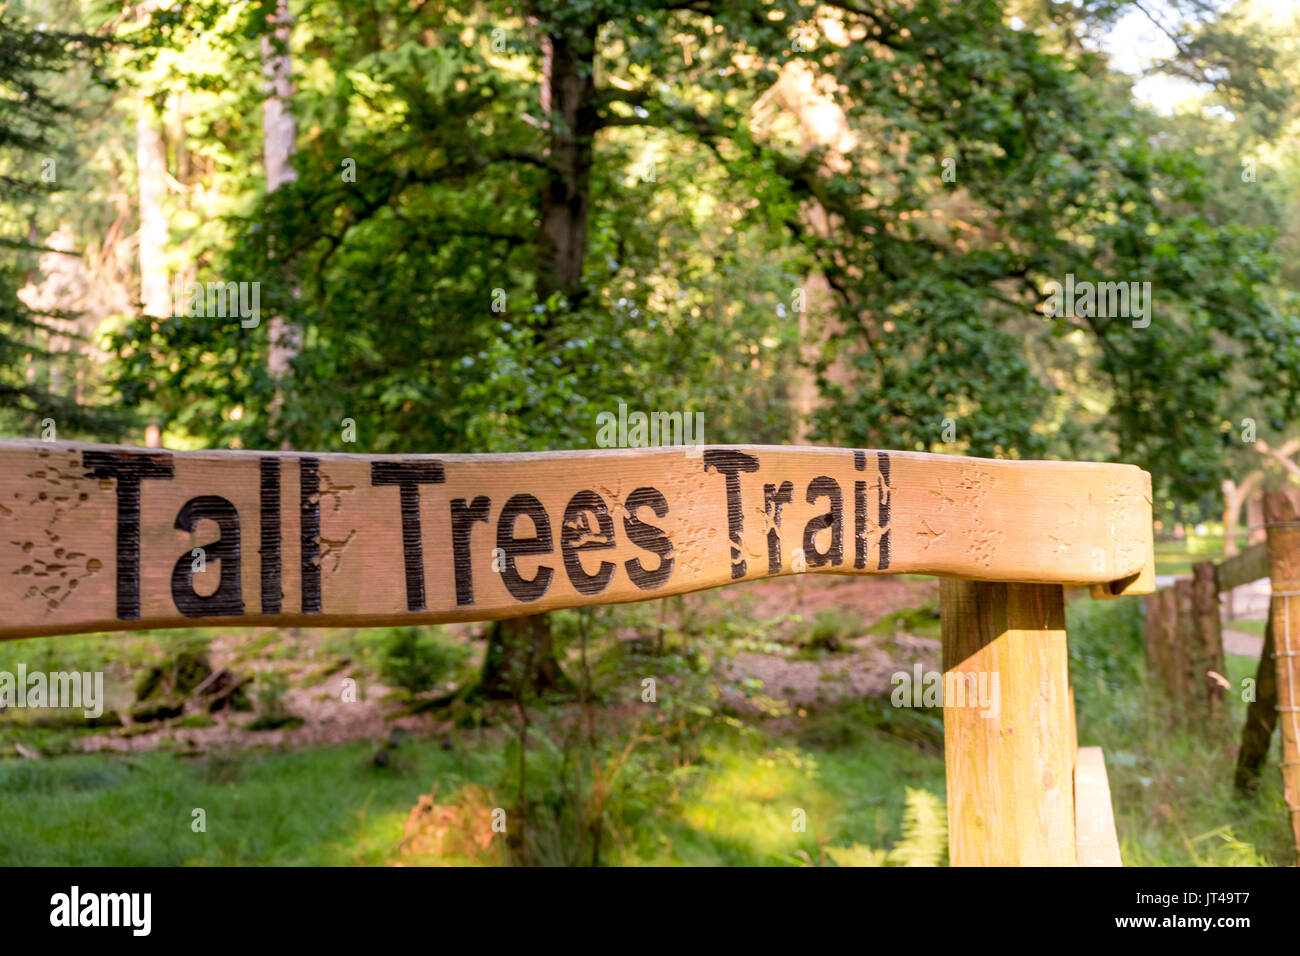 Tall Trees Trail sign in il New Forest National Park, Inghilterra meridionale, Regno Unito Foto Stock